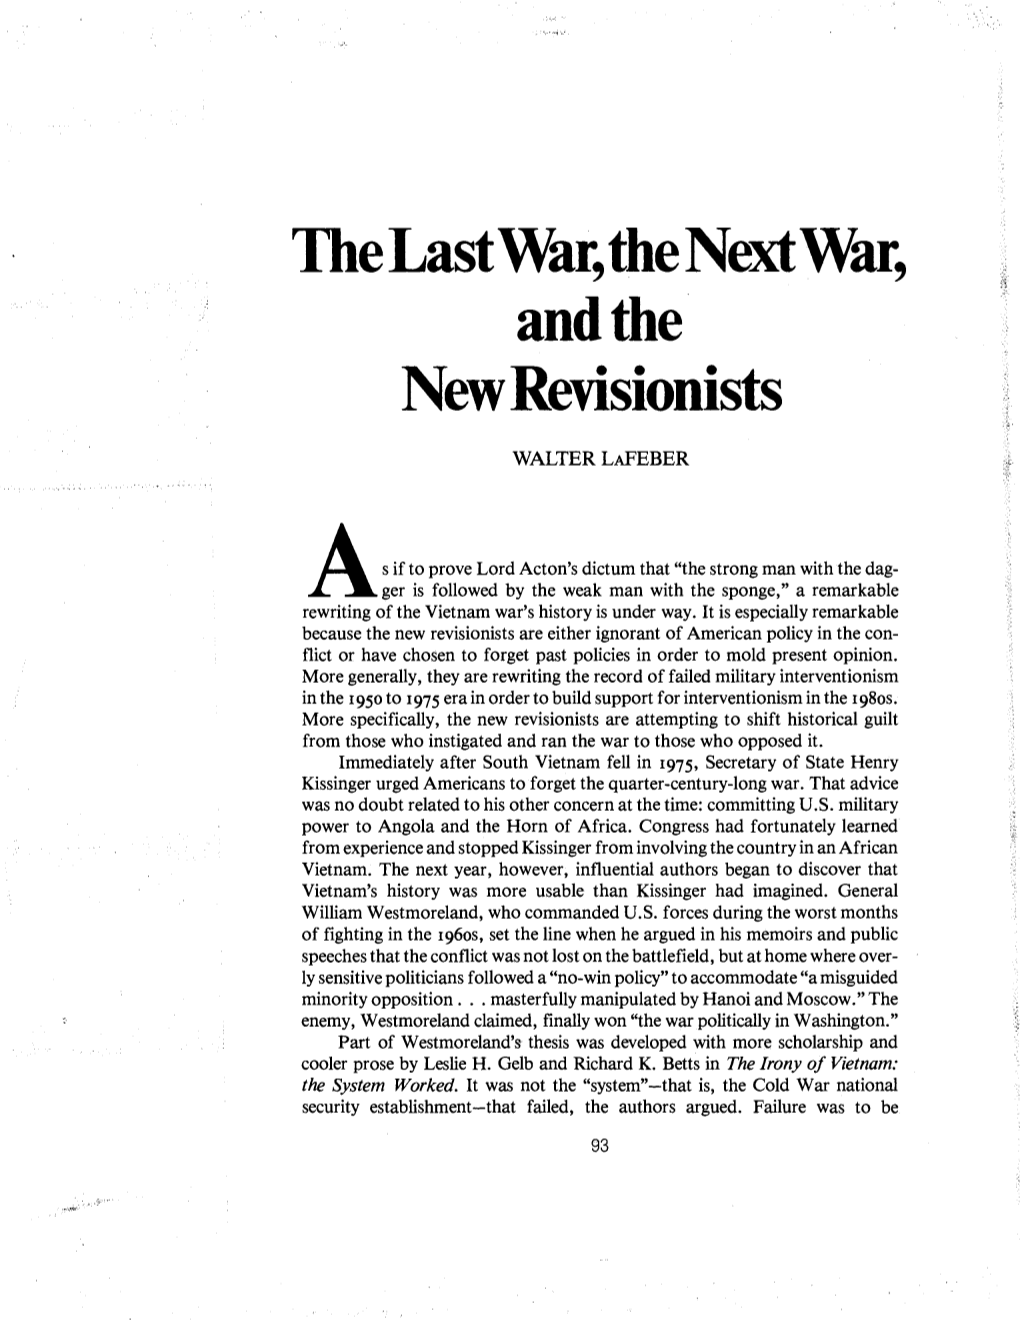 Walter Lafeber / the Last War, the Next War, and the New Revisionists